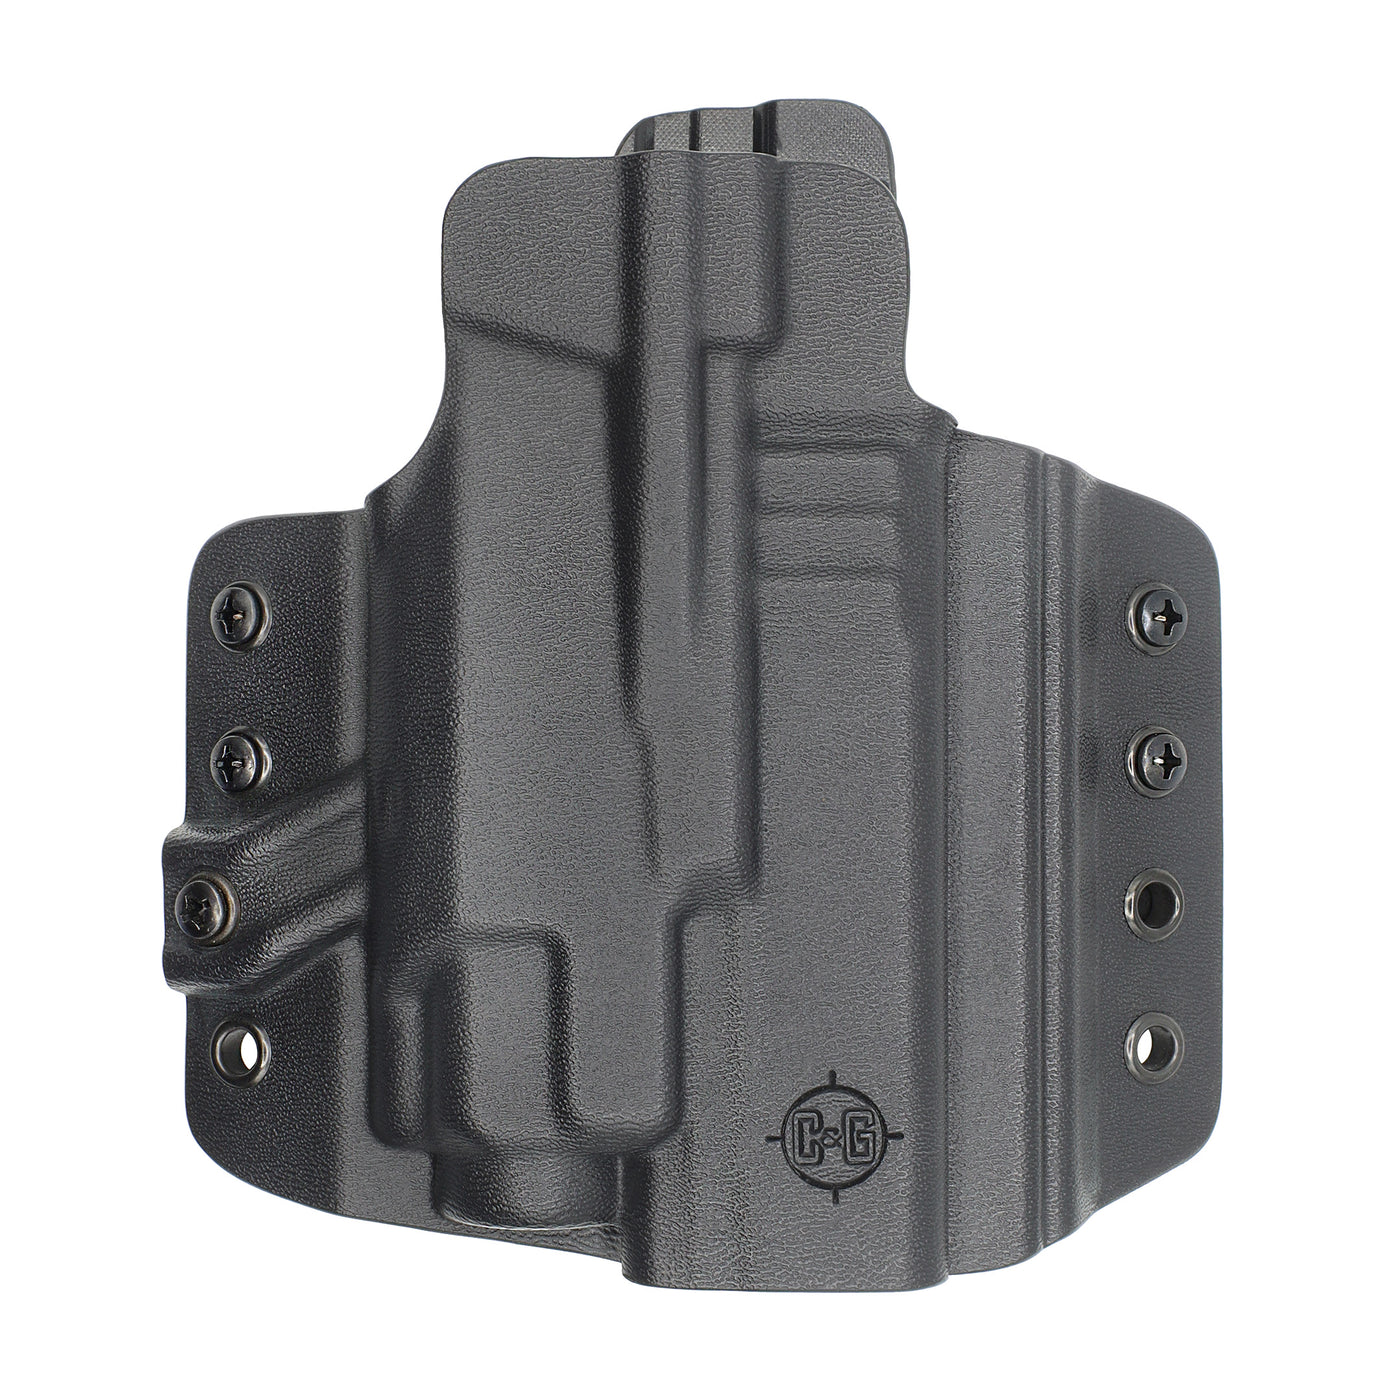 C&G Holsters Quickship OWB Tactical CZ P10/c Streamlight TLR8